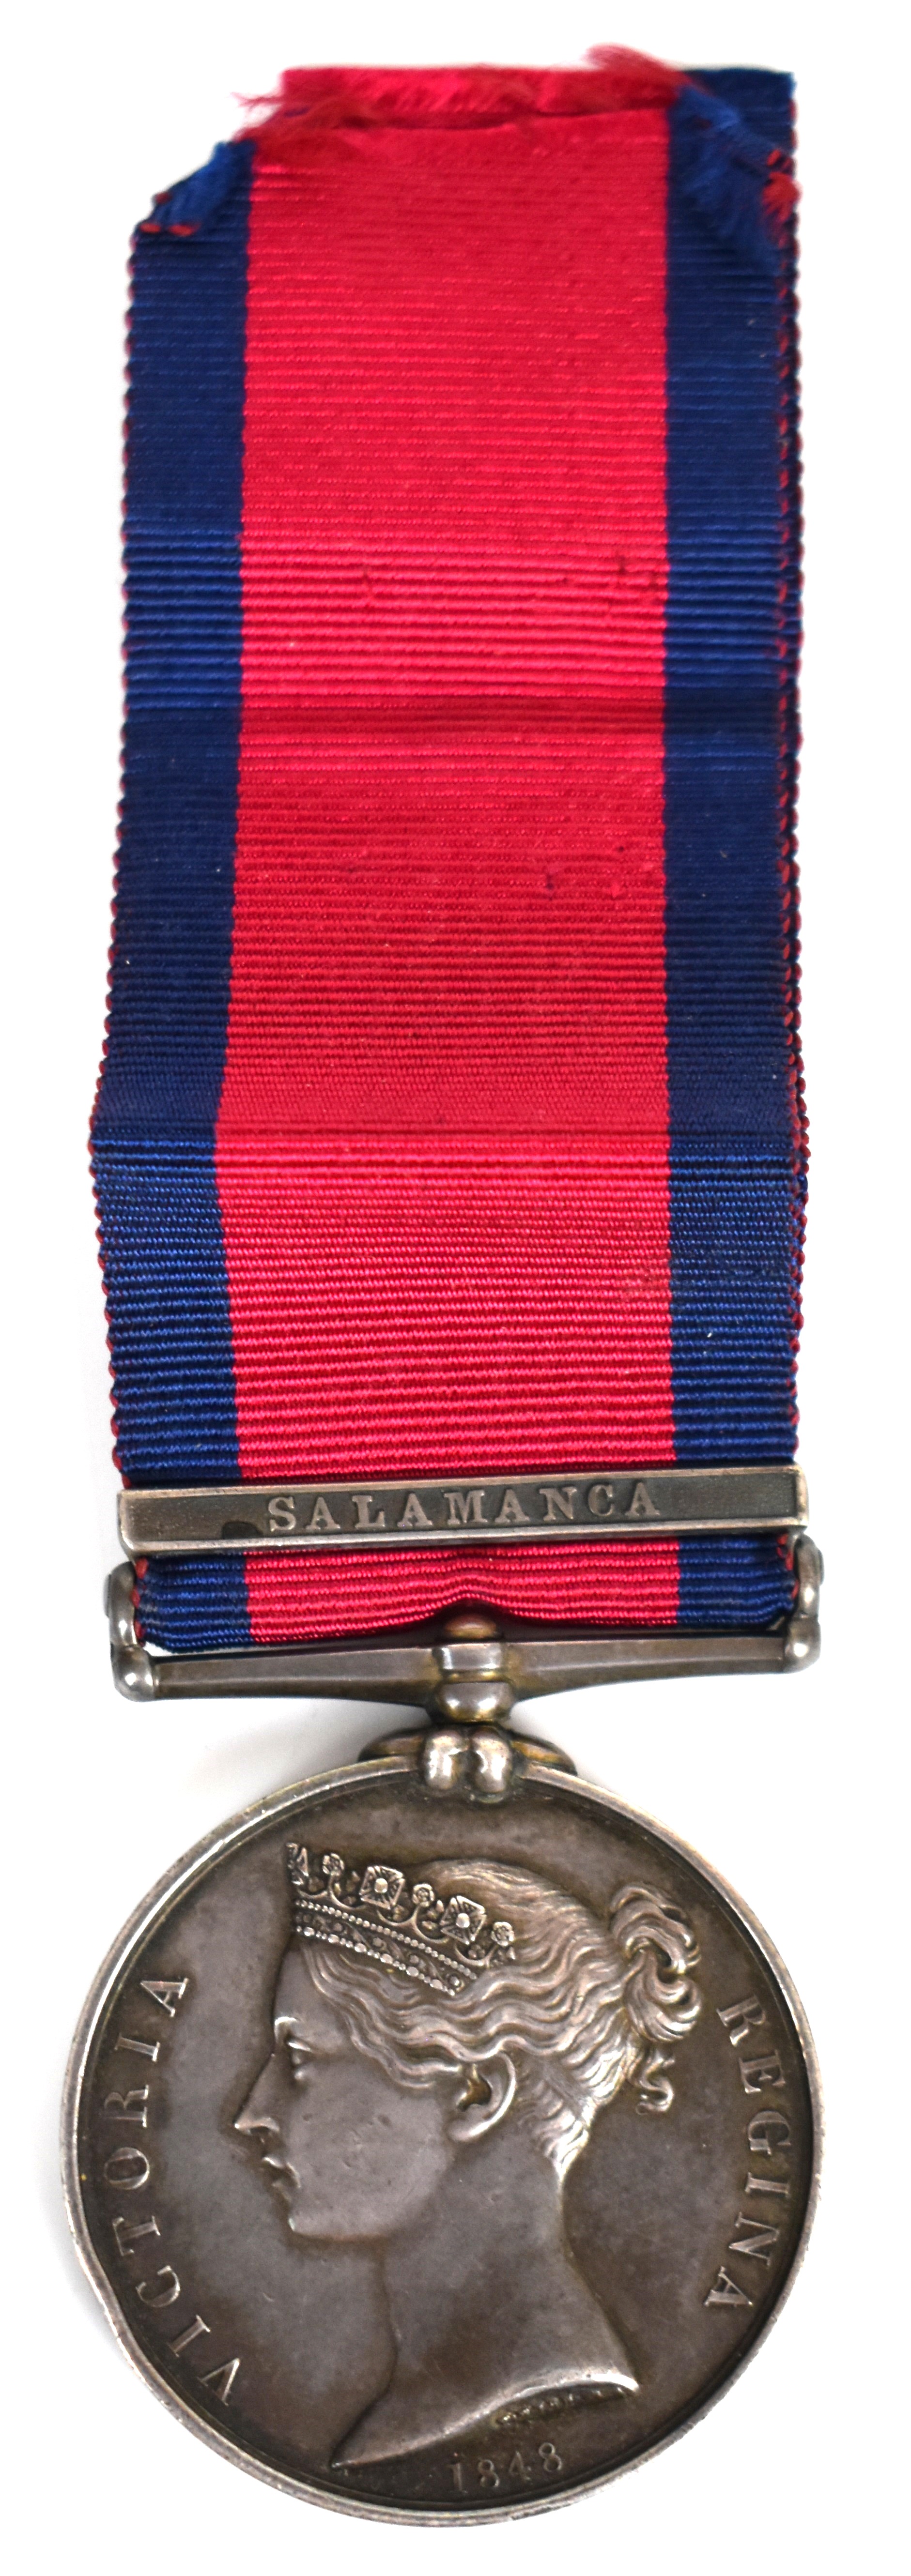 Military General Service Medal with clasp for Salamanca named to Thomas Bainbridge, 68th Foot - Image 3 of 4